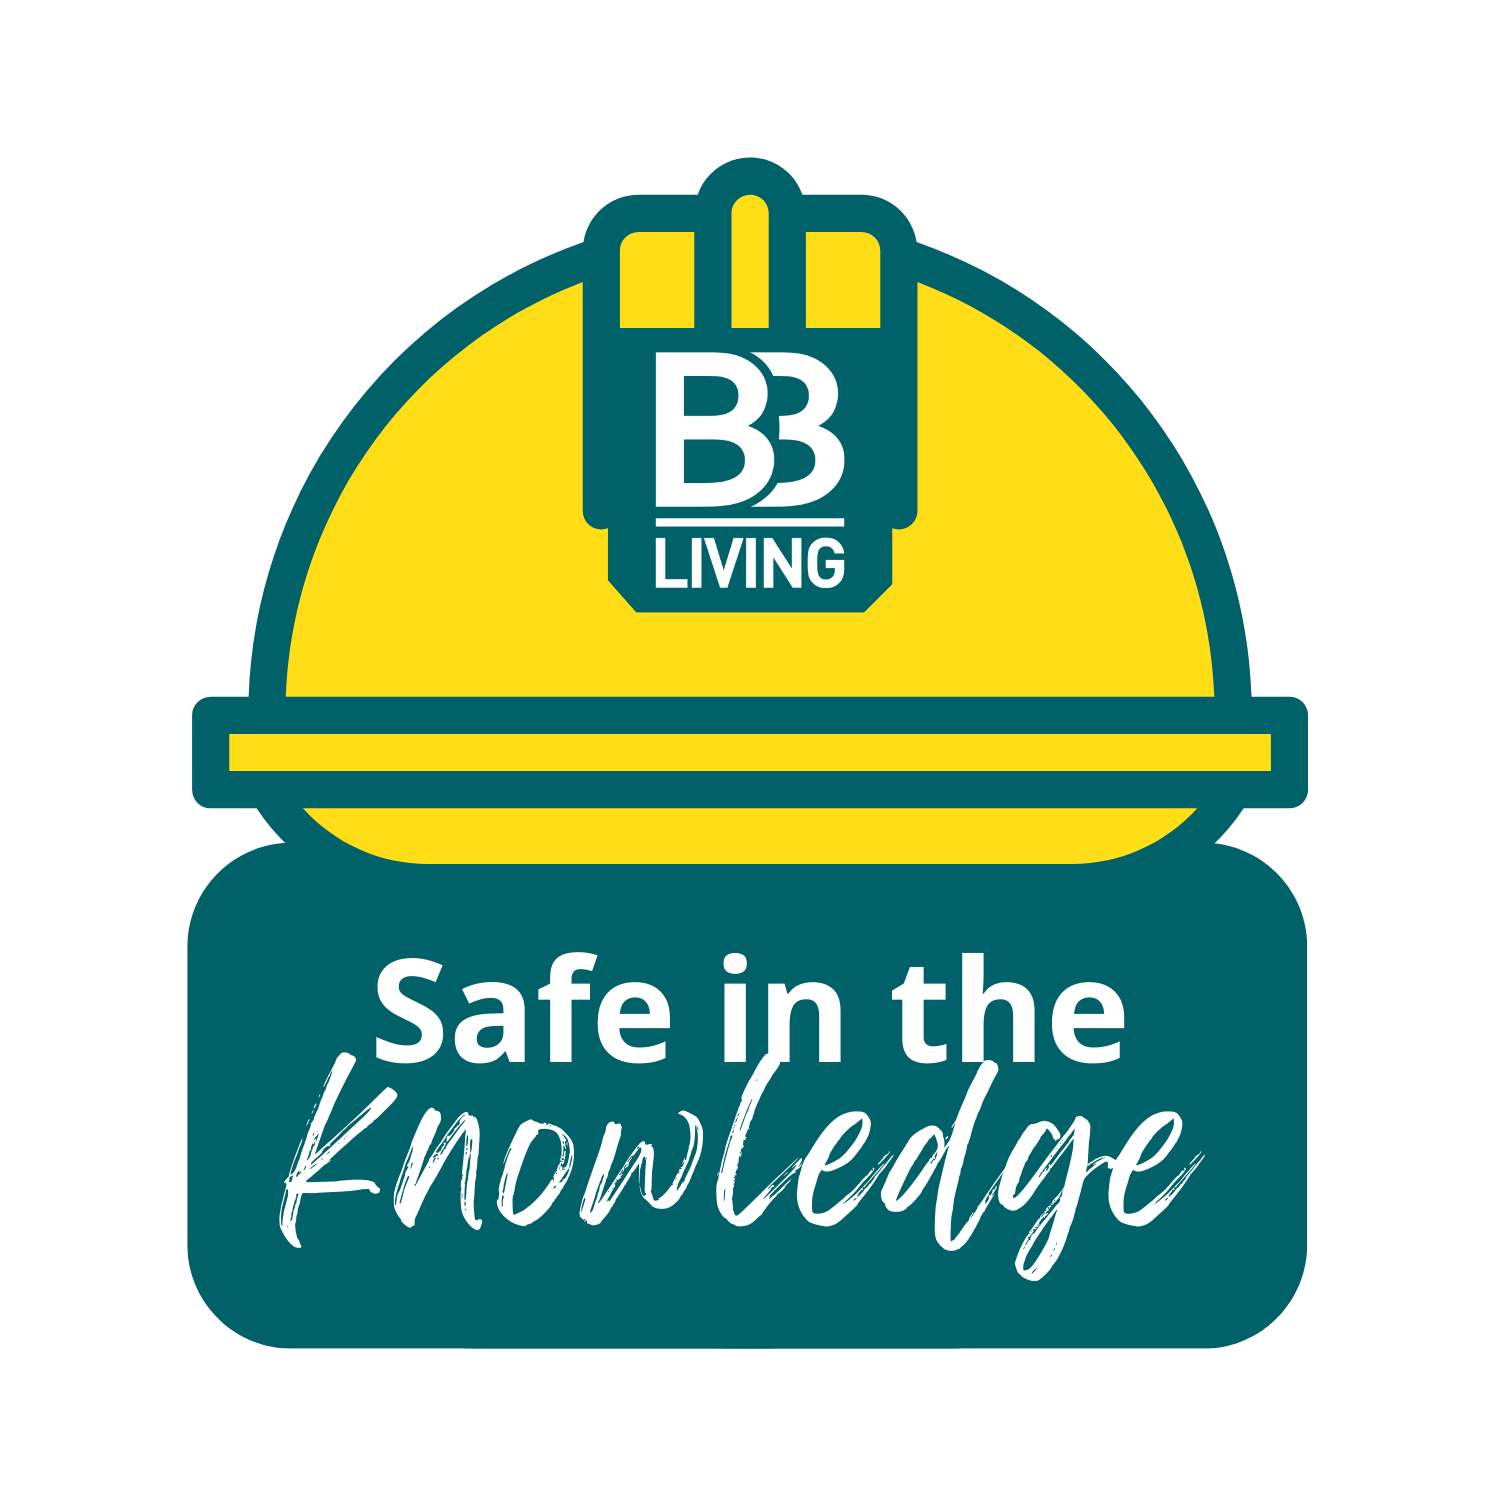 Safe in the knowledge campaign logo